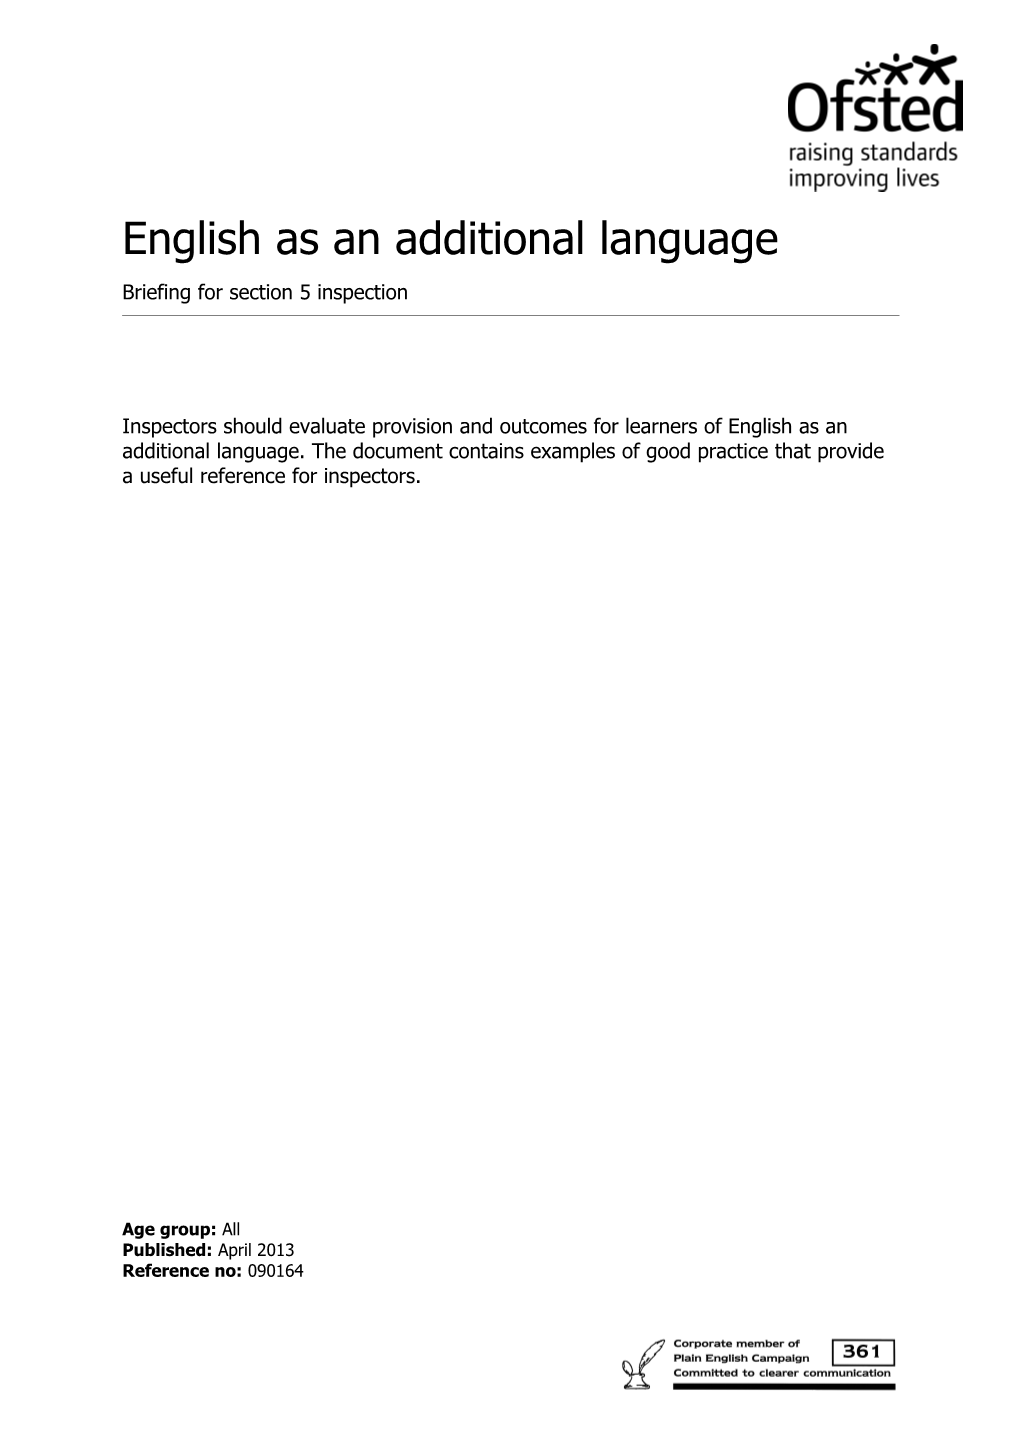 English_As_An_Additional_Language_Briefing_For_Section5_Inspection